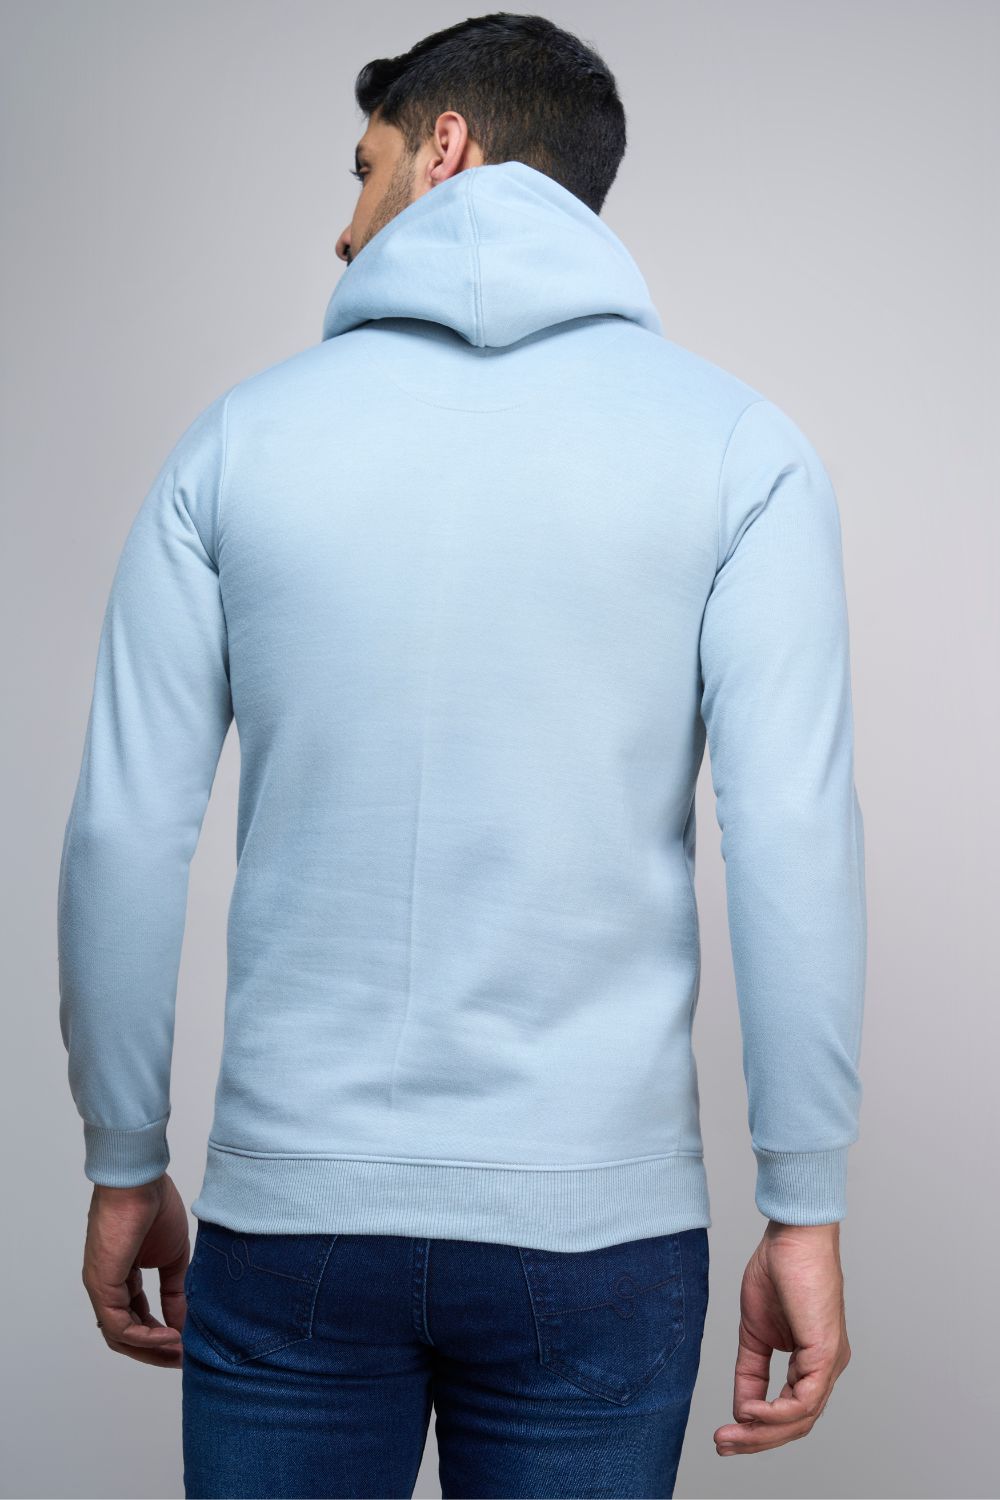 Shenghayo Blue colored, hoodie for men with full sleeves and relaxed fit, back view.